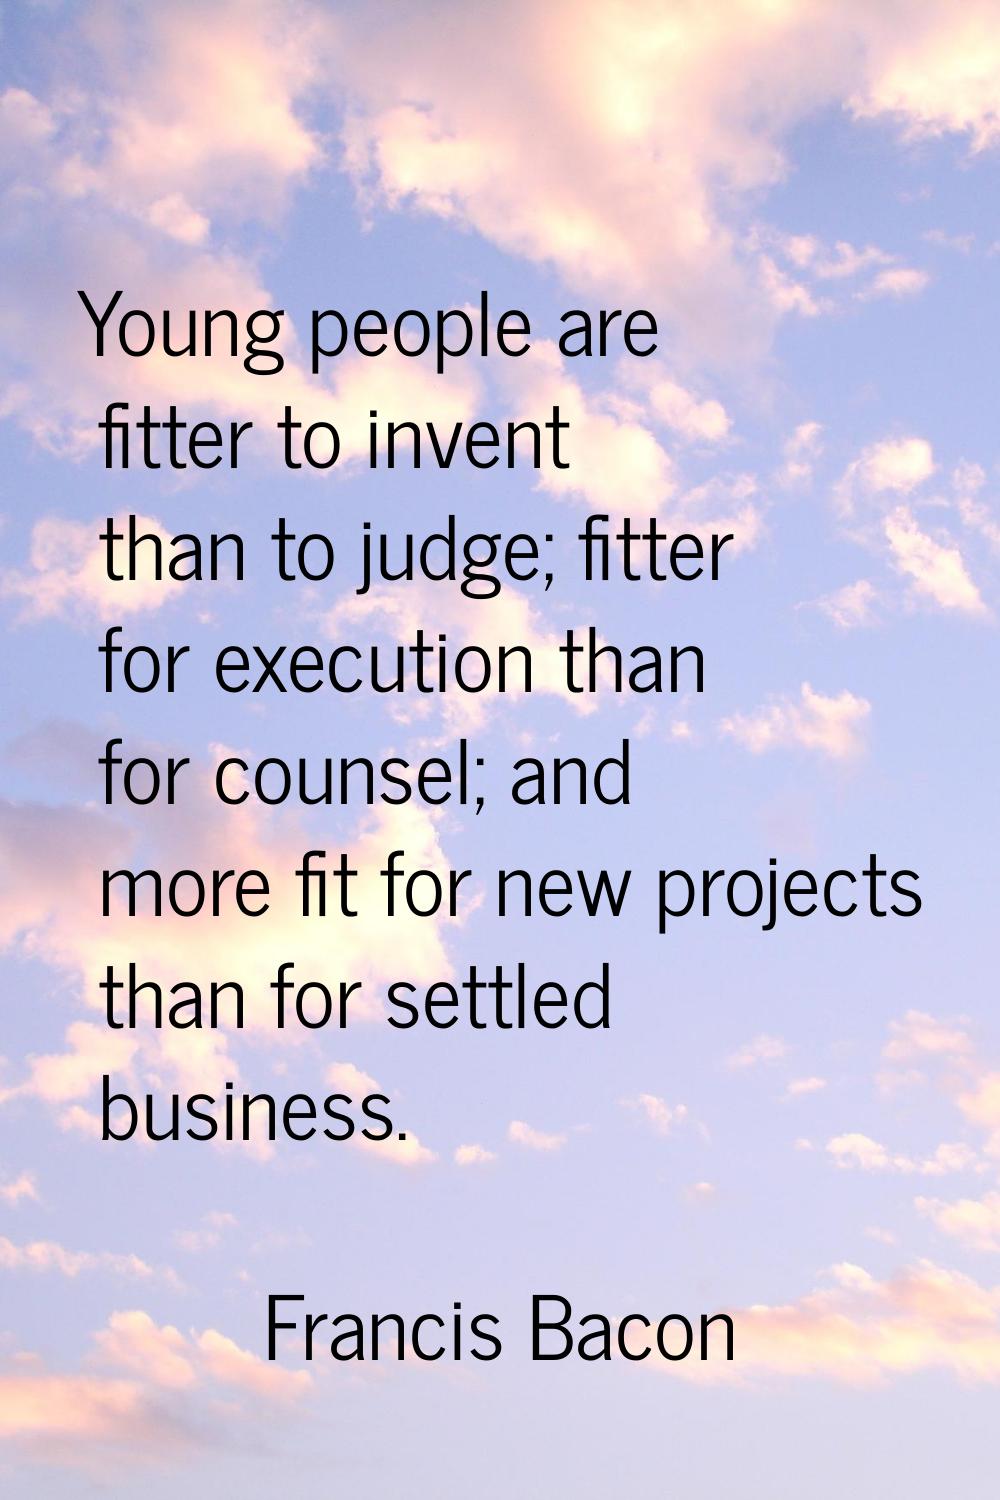 Young people are fitter to invent than to judge; fitter for execution than for counsel; and more fi